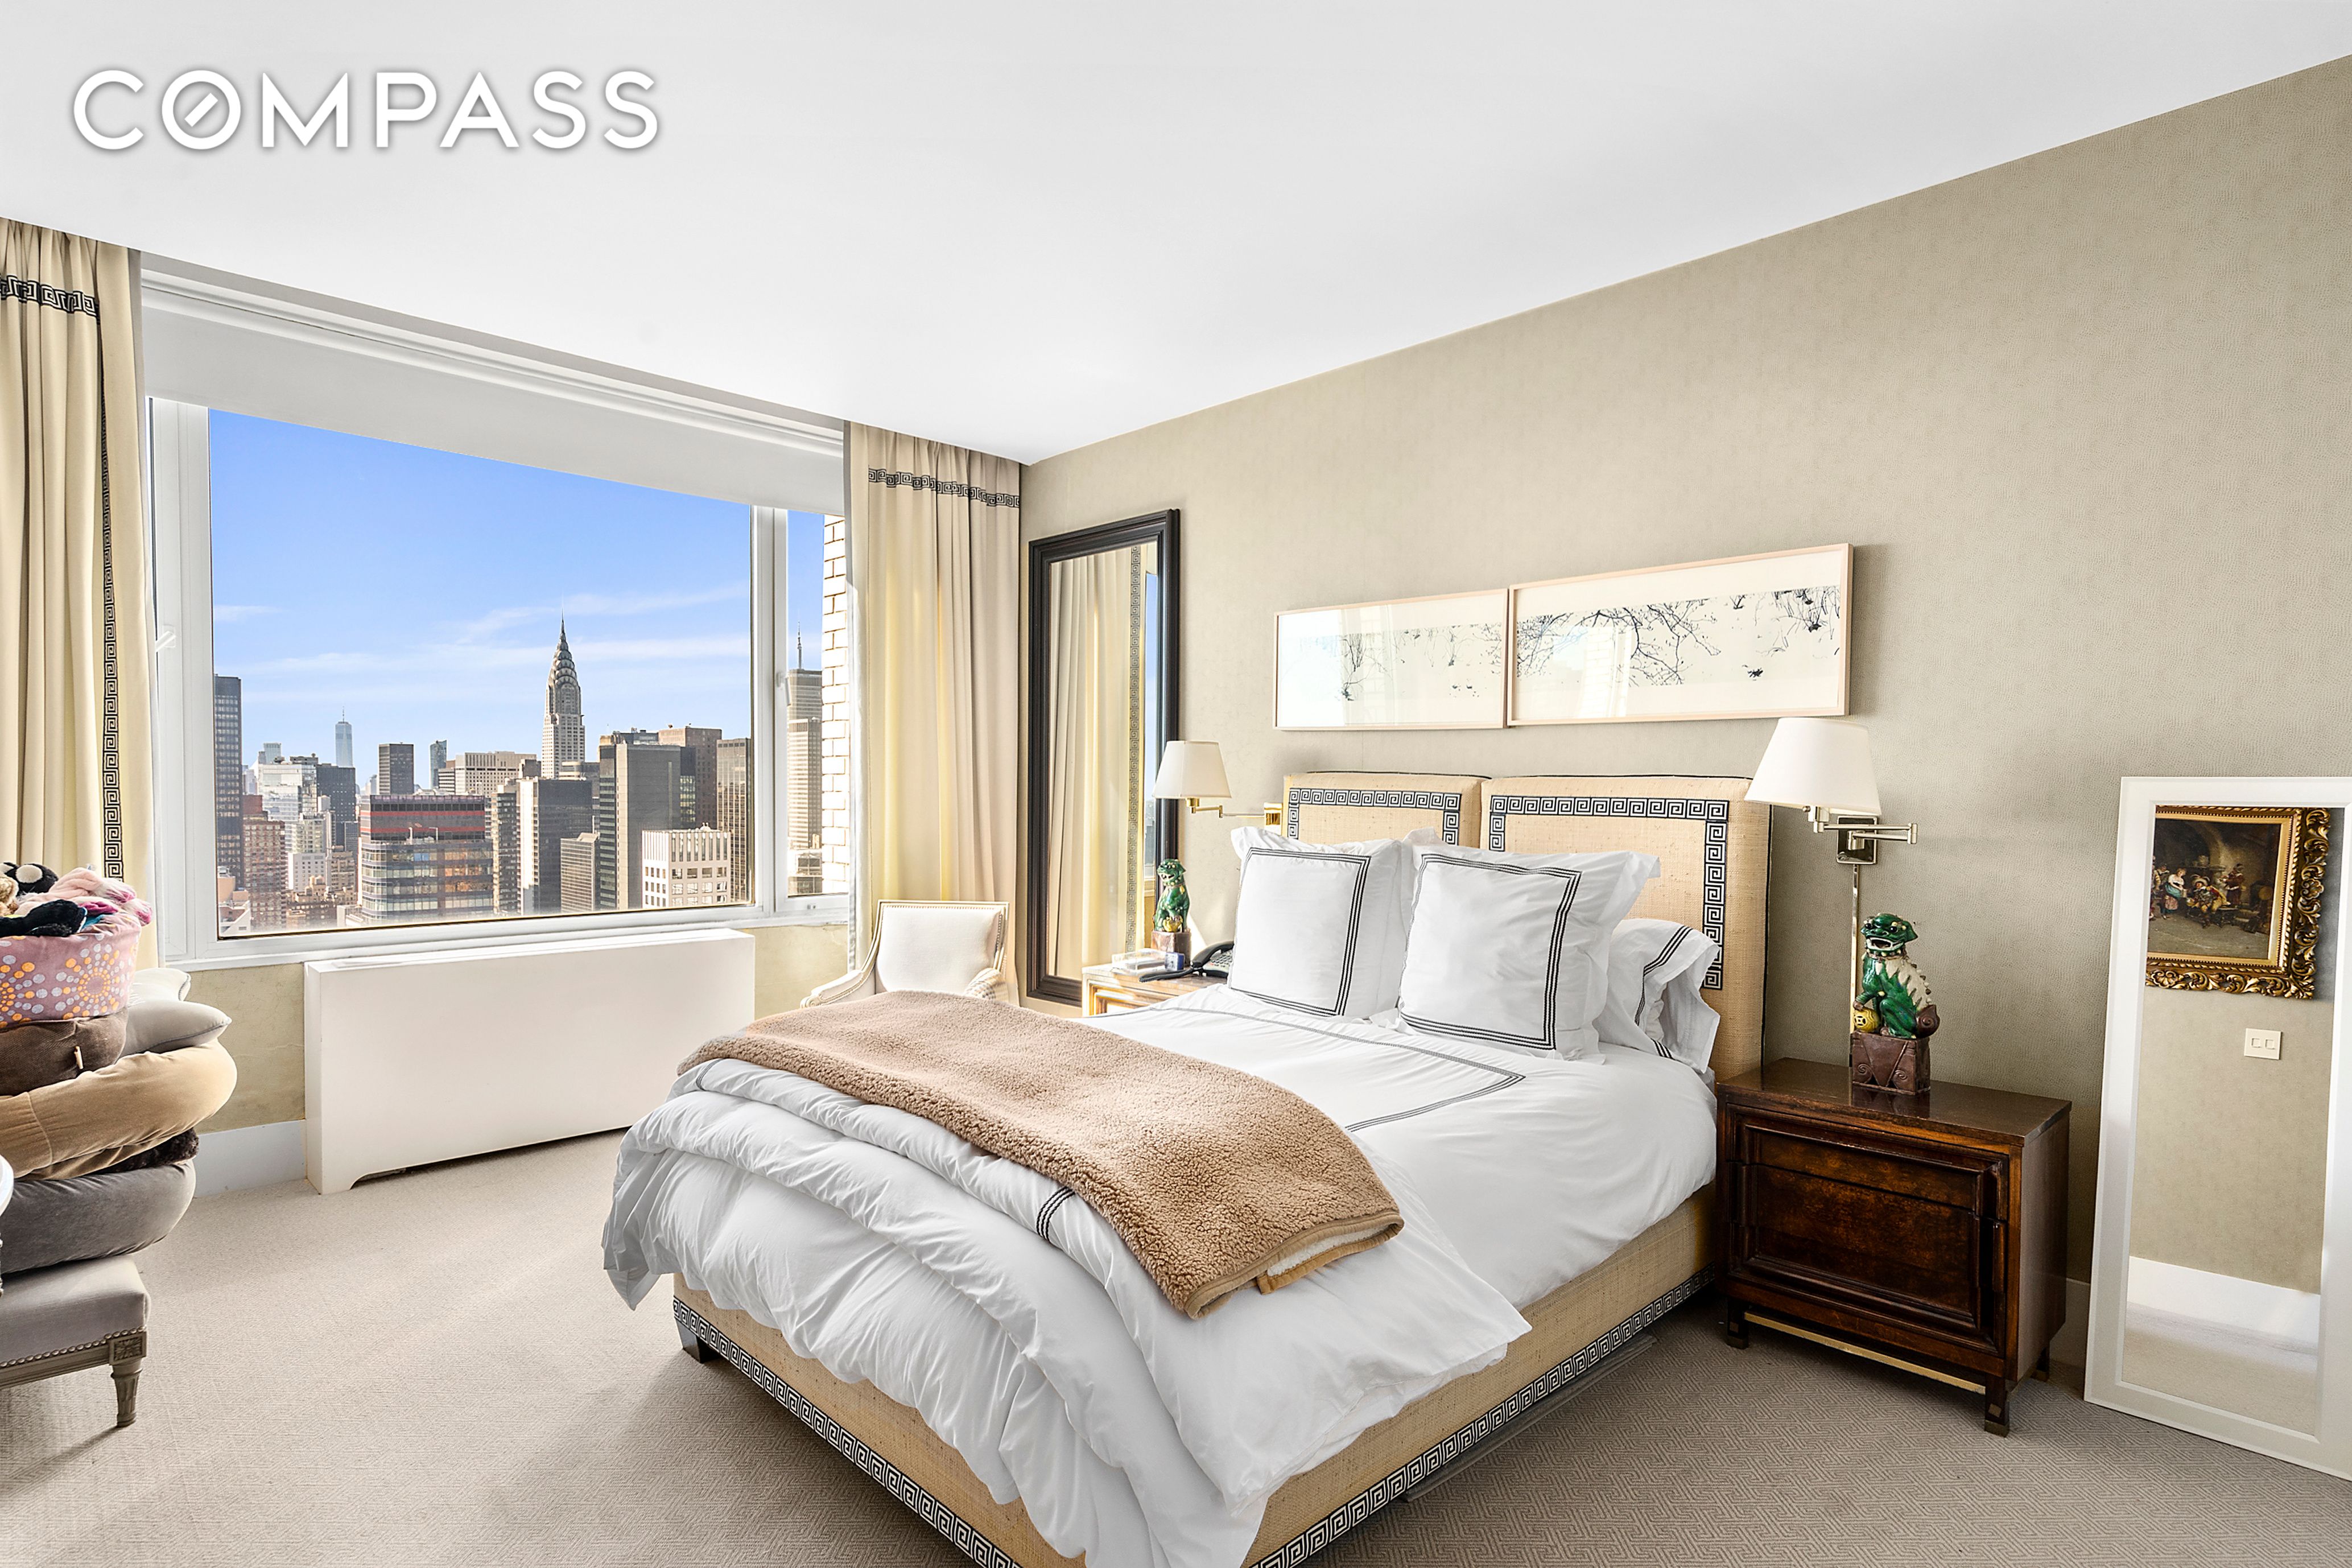 303 East 57th Street PH-A Sutton Place New York, NY 10022